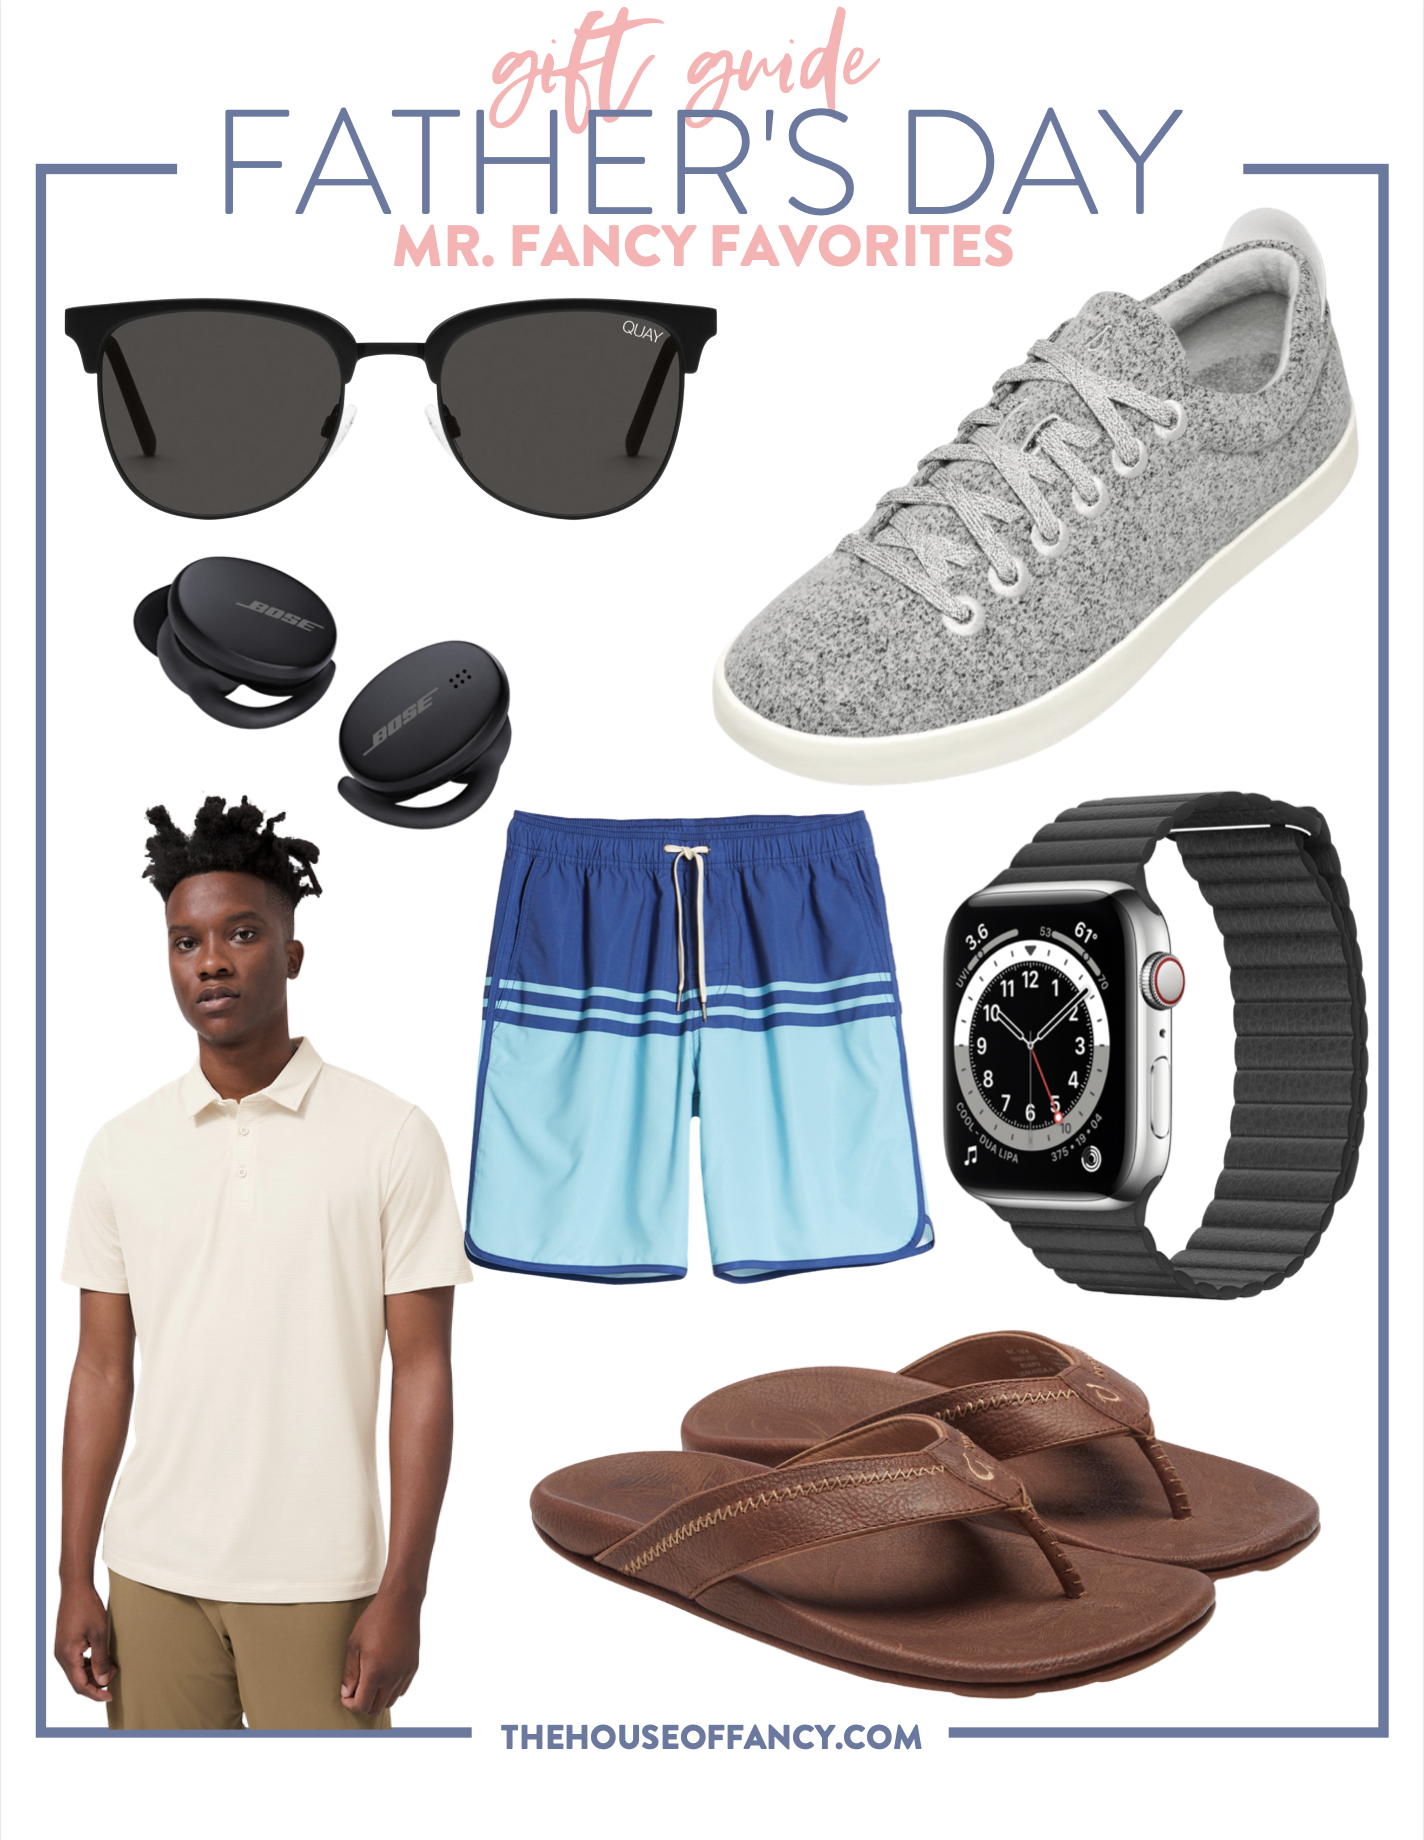 items for fathers day gifts | Father's Day Gift Ideas by popular Houston life and style blog, The House of Fancy: collage image of a Quay sunglasses, grey fabric sneakers, blue swimsuit shorts, black wrist watch, Bose earbuds, brown slide sandals, and cream polo shirt. 